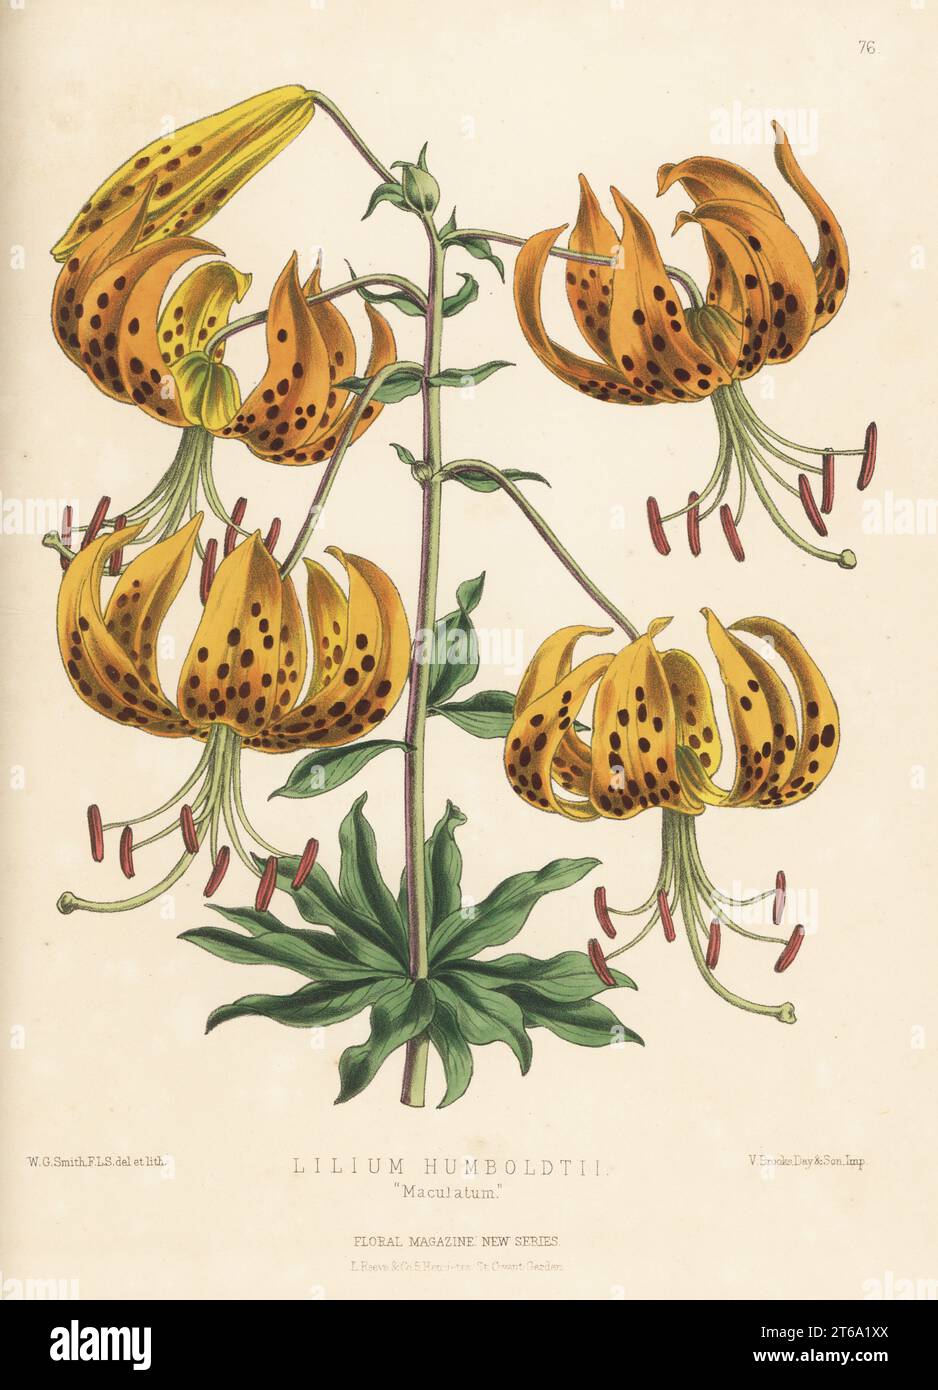 Humboldt's lily, Lilium humboldtii. As Lilium humboldtii maculatum. Native of California. Handcolored botanical illustration drawn and lithographed by Worthington George Smith from Henry Honywood Dombrain's Floral Magazine, New Series, Volume 2, L. Reeve, London, 1873. Lithograph printed by Vincent Brooks, Day & Son. Stock Photo